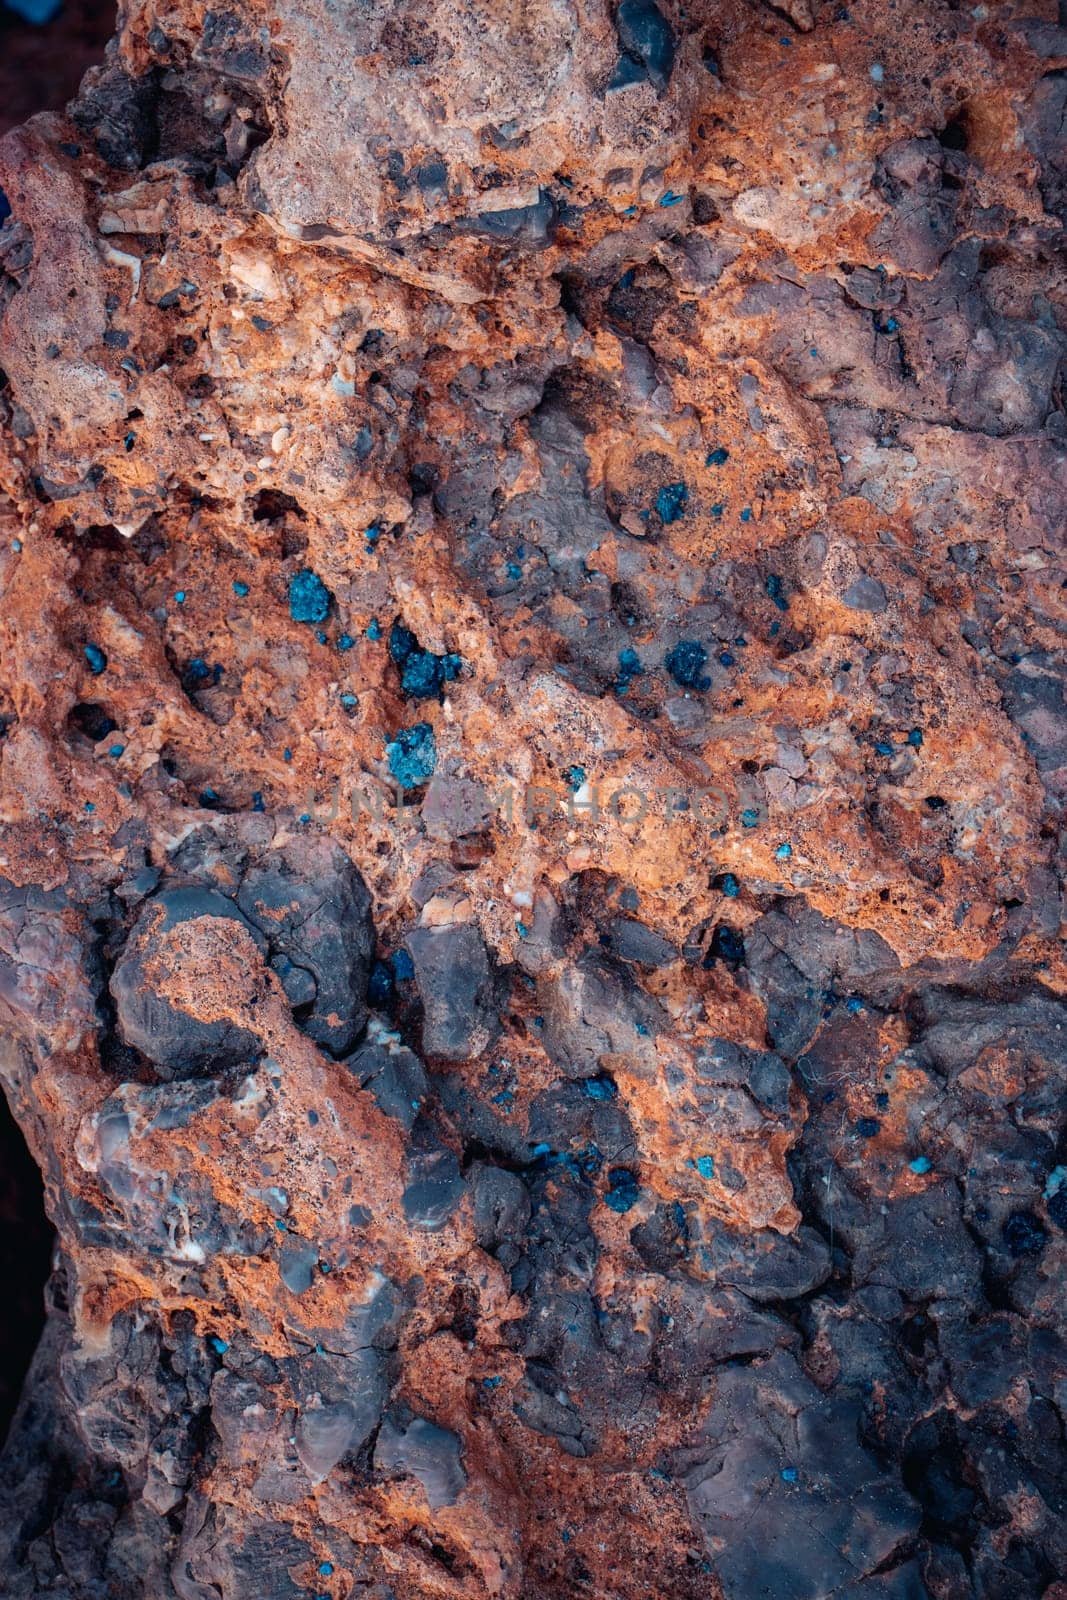 Red textured rock background photo. Close-up blue scattered in the stone. Sandstone by _Nataly_Nati_